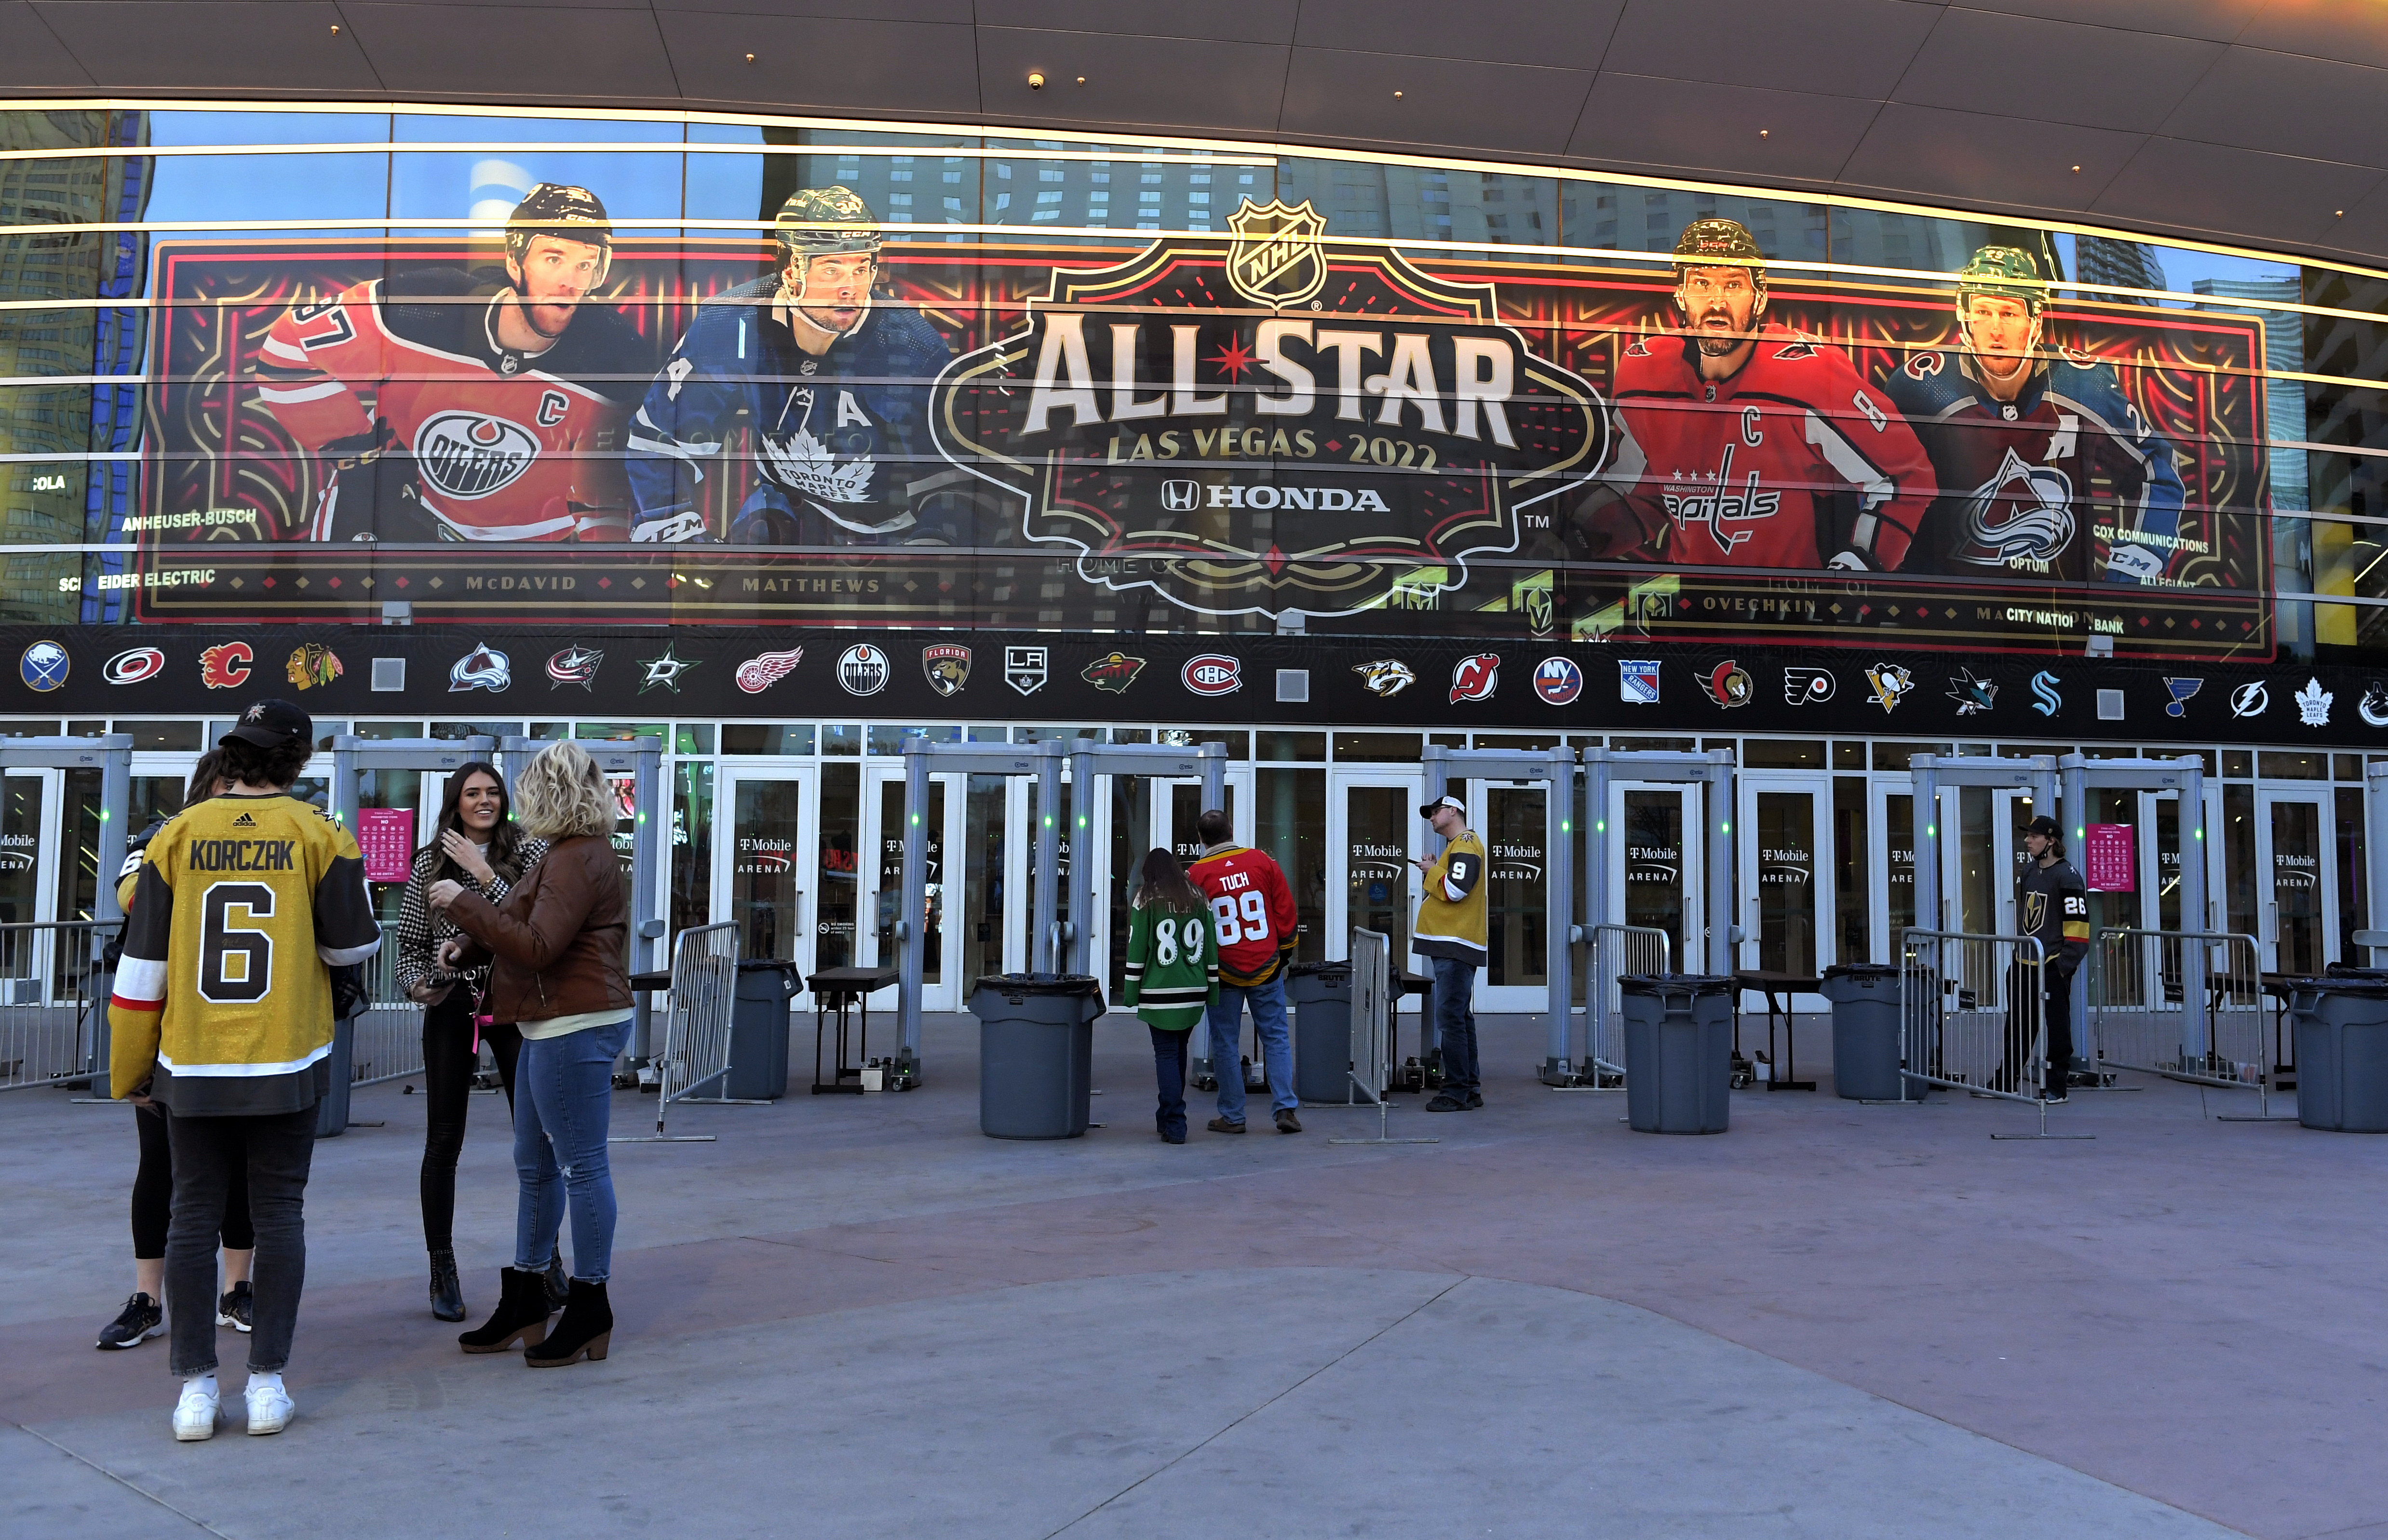 NHL How to watch the All-Star Skills Competition Friday (2-4-22)